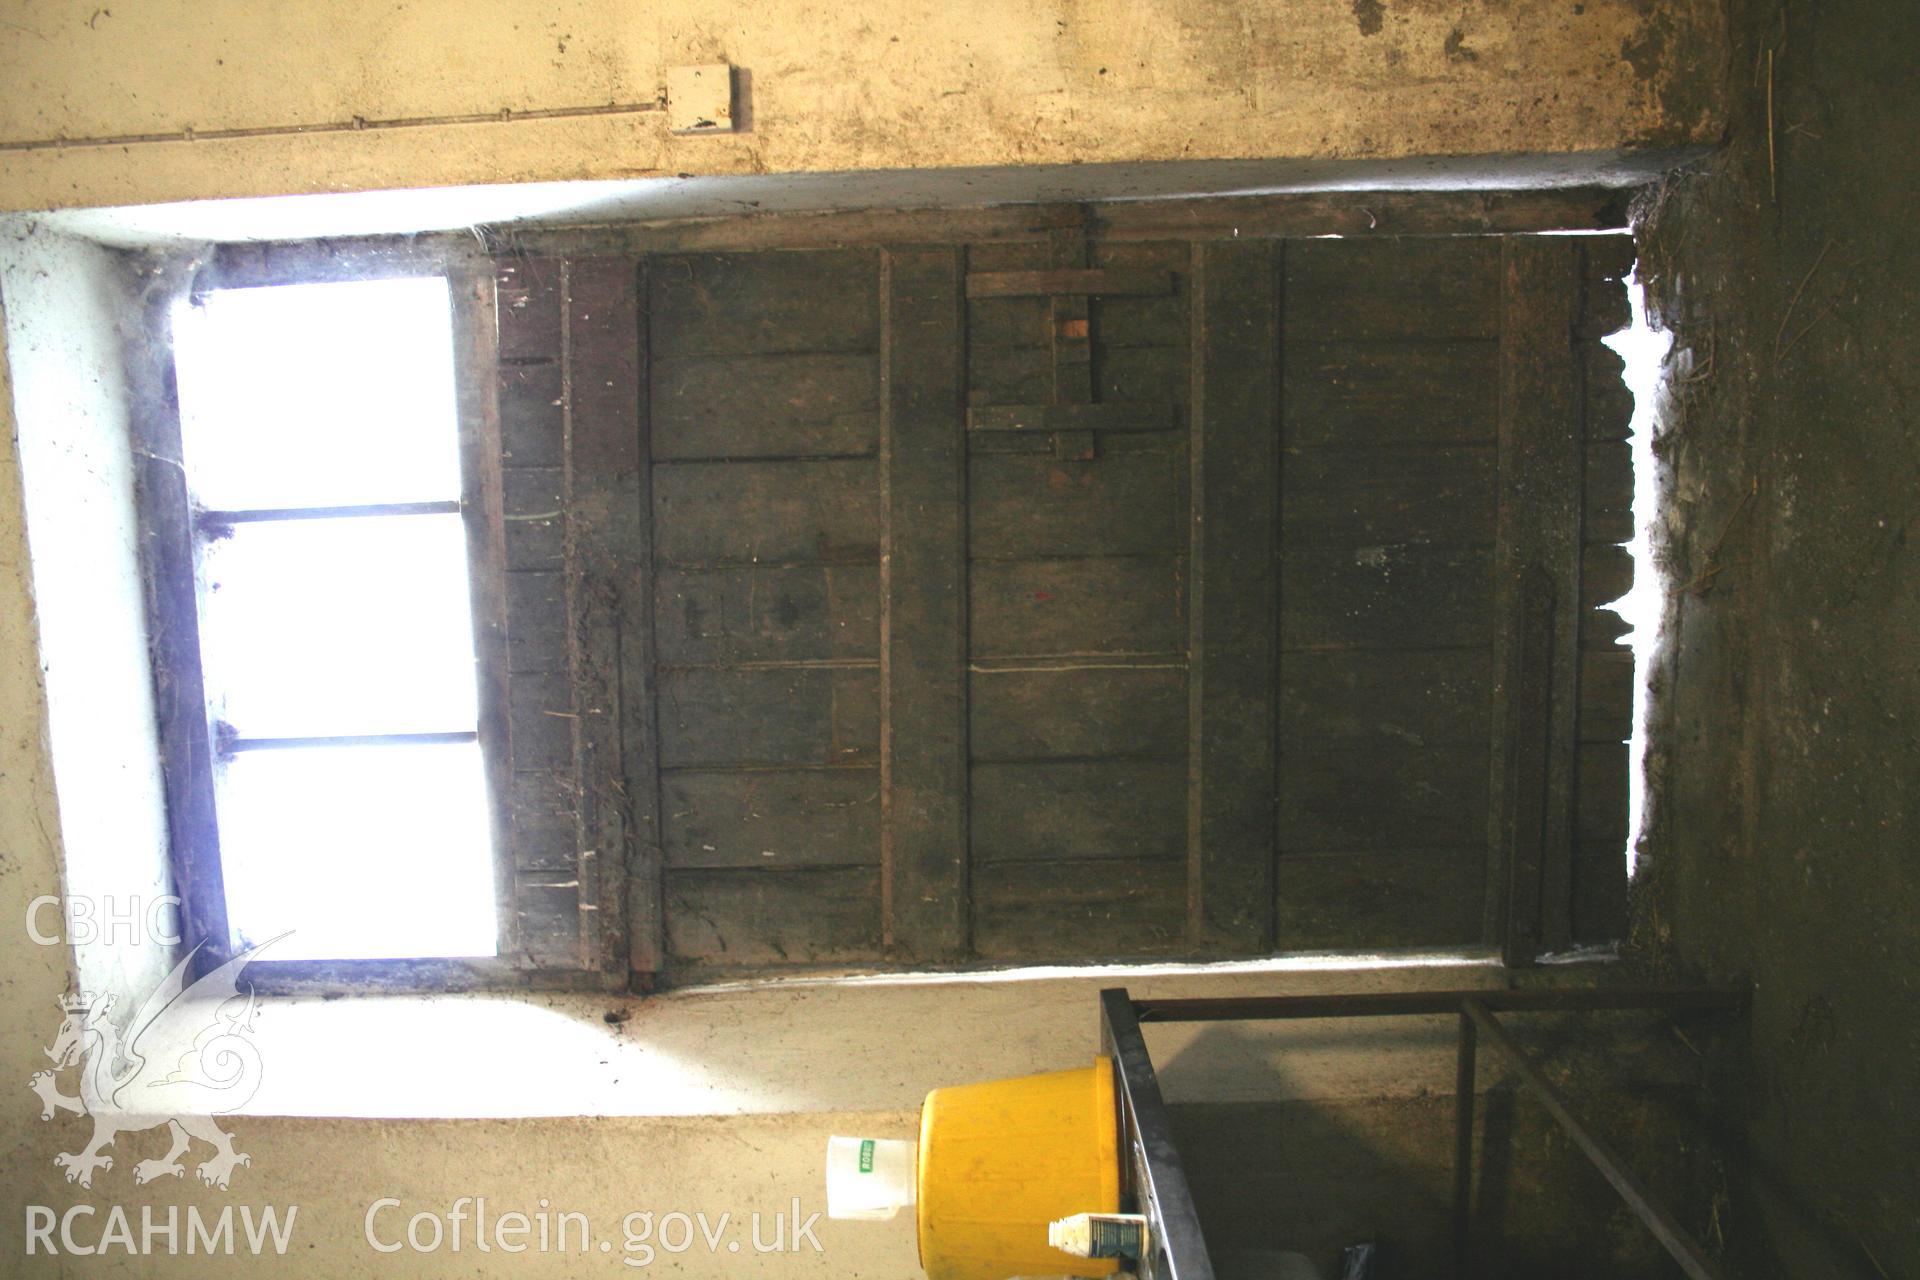 Interior view of wooden door. Photographic survey of the northern range of cattle-shelters at Tan-y-Graig Farm, Llanfarian, conducted by Geoff Ward and John Wiles, 11th December 2006.